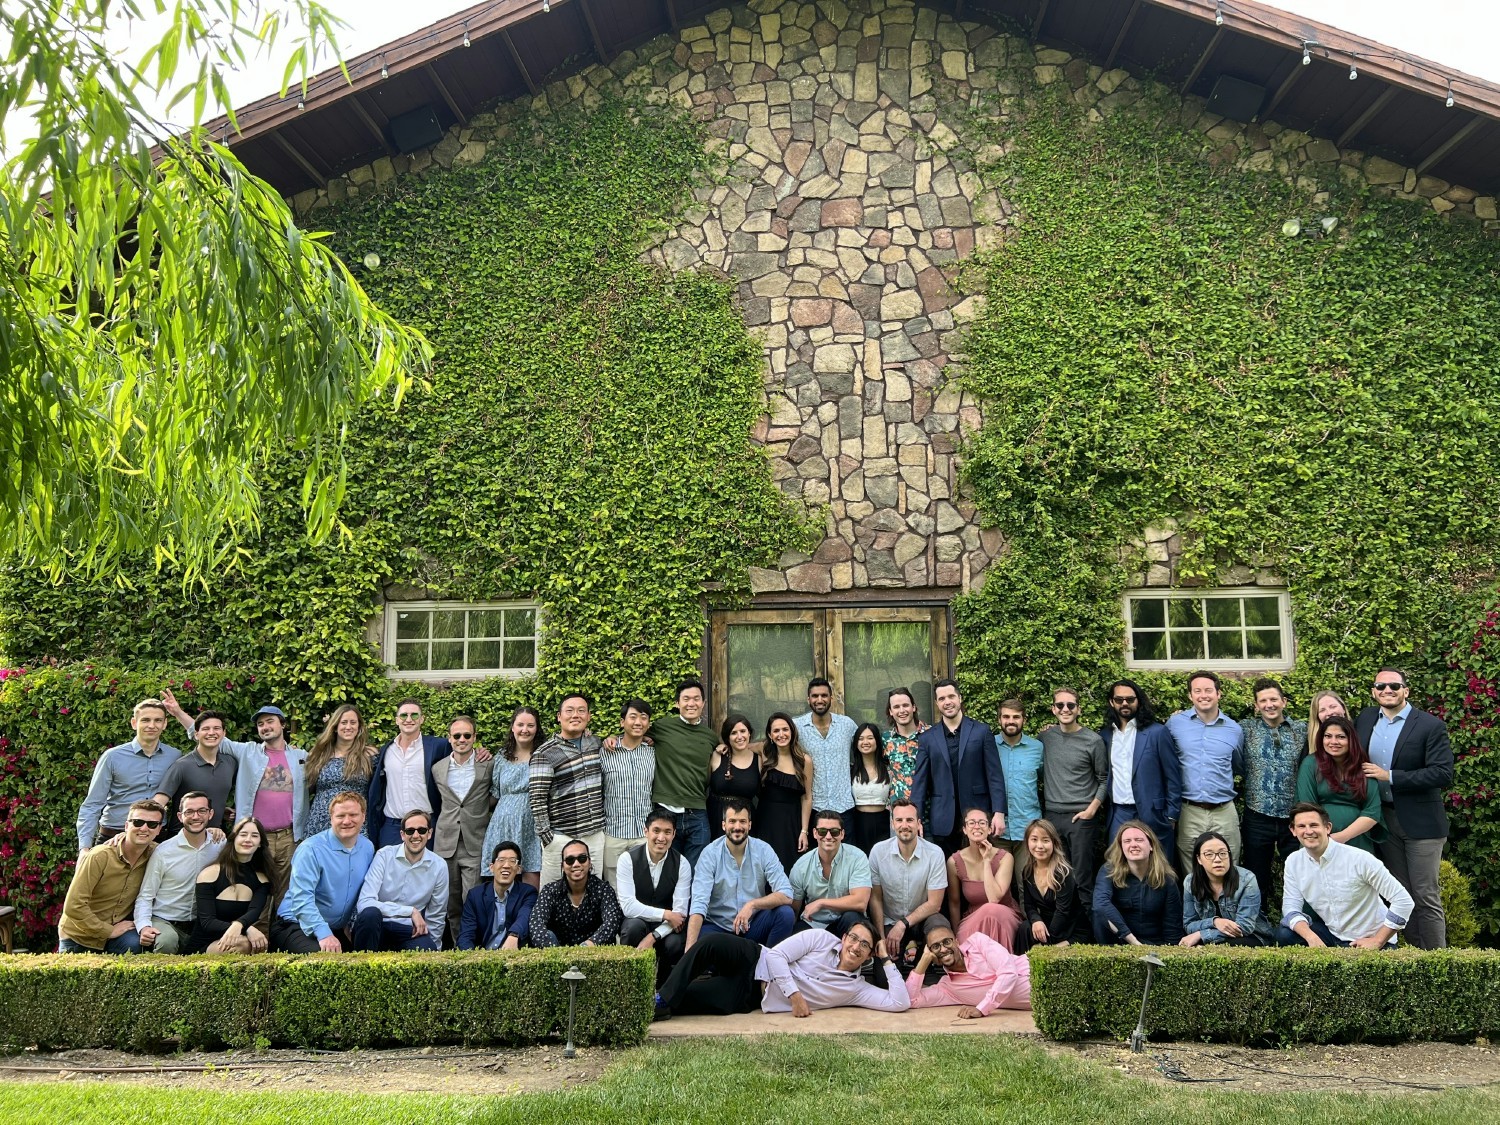 Mutineers at our May 2022 offsite in San Jose, California